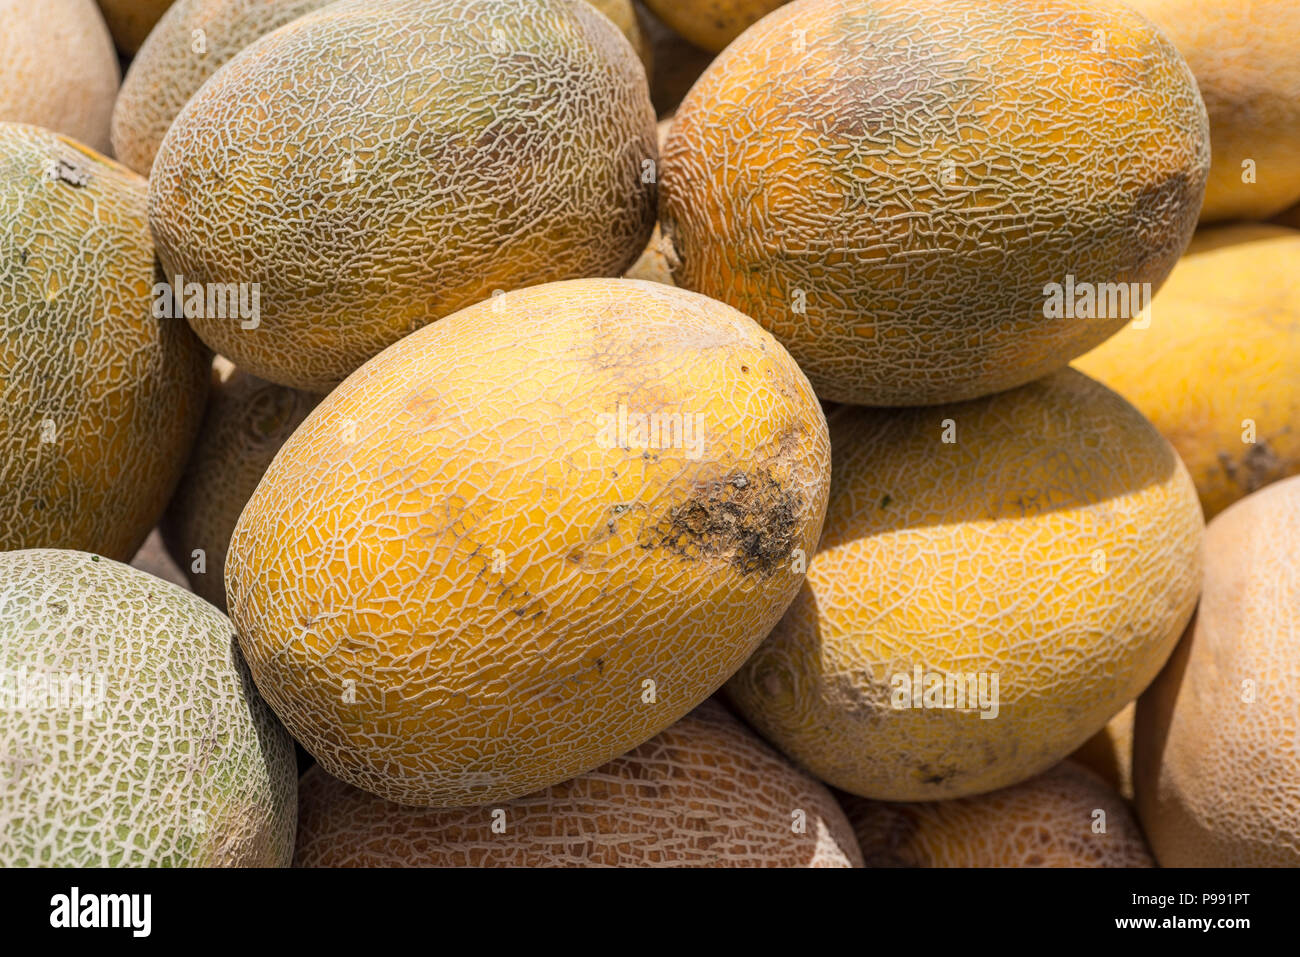 Melons in market Stock Photo